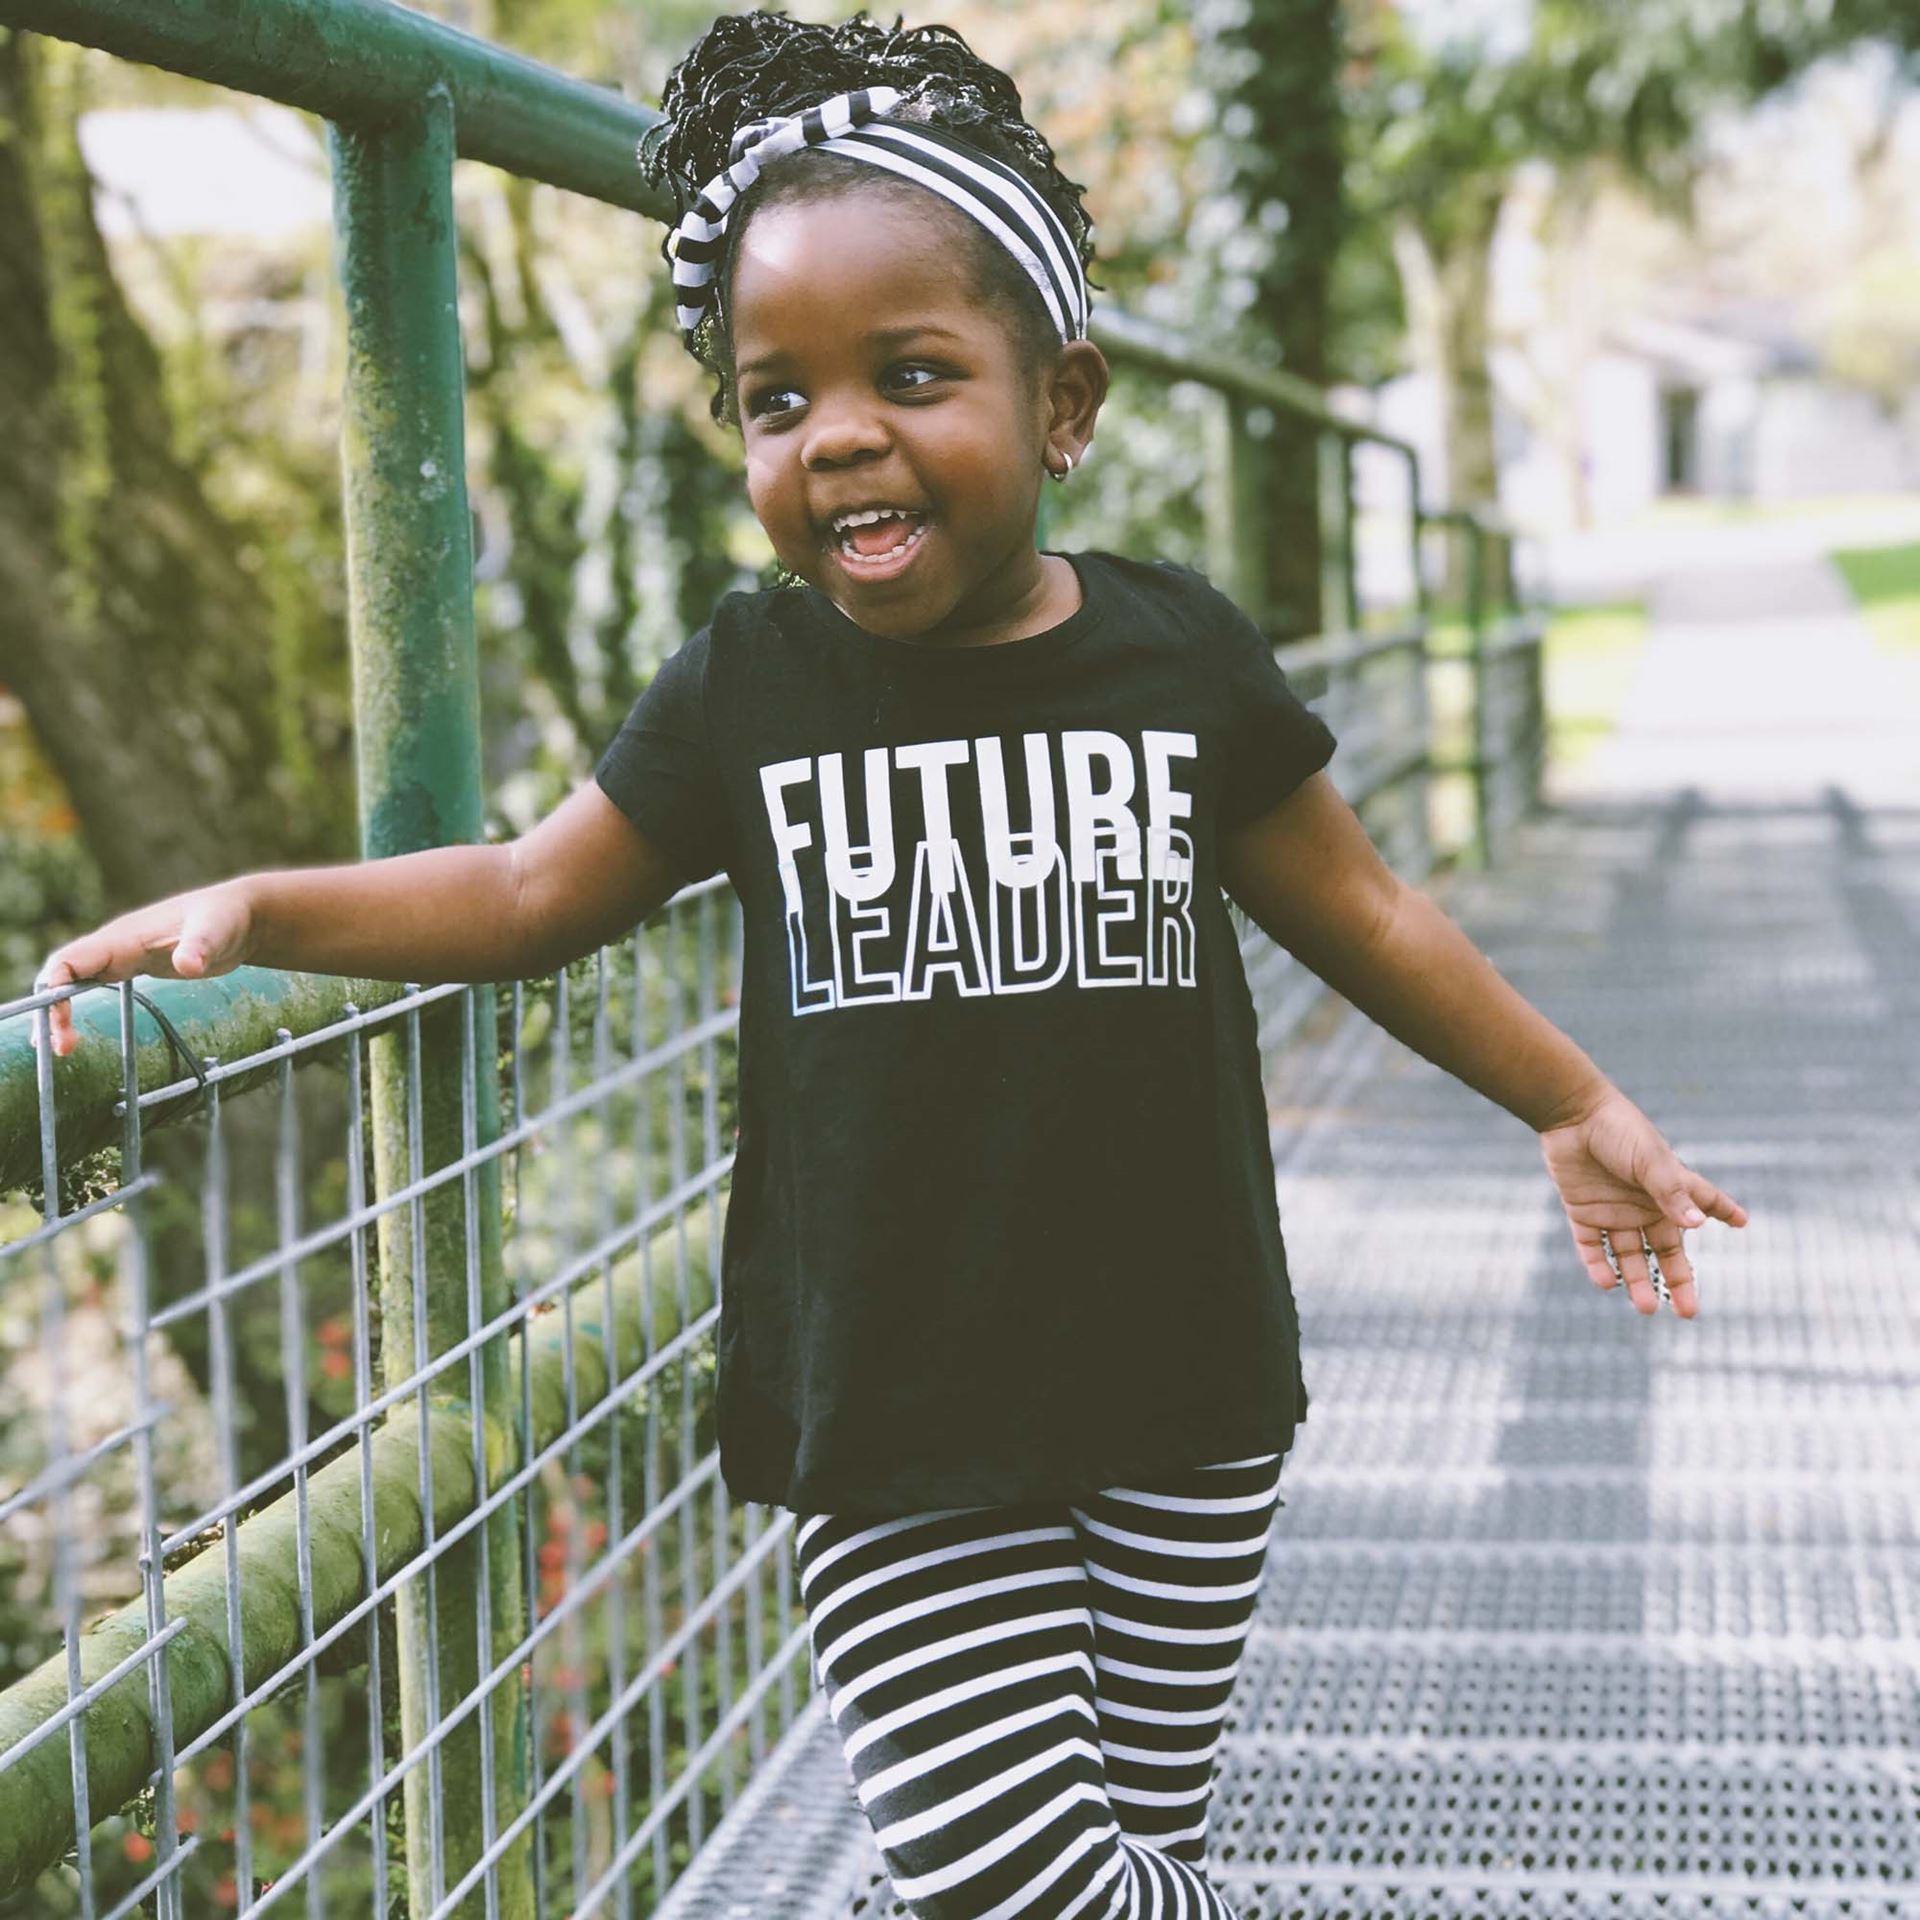 Image of a little girl wearing a shirt that says Future Leader